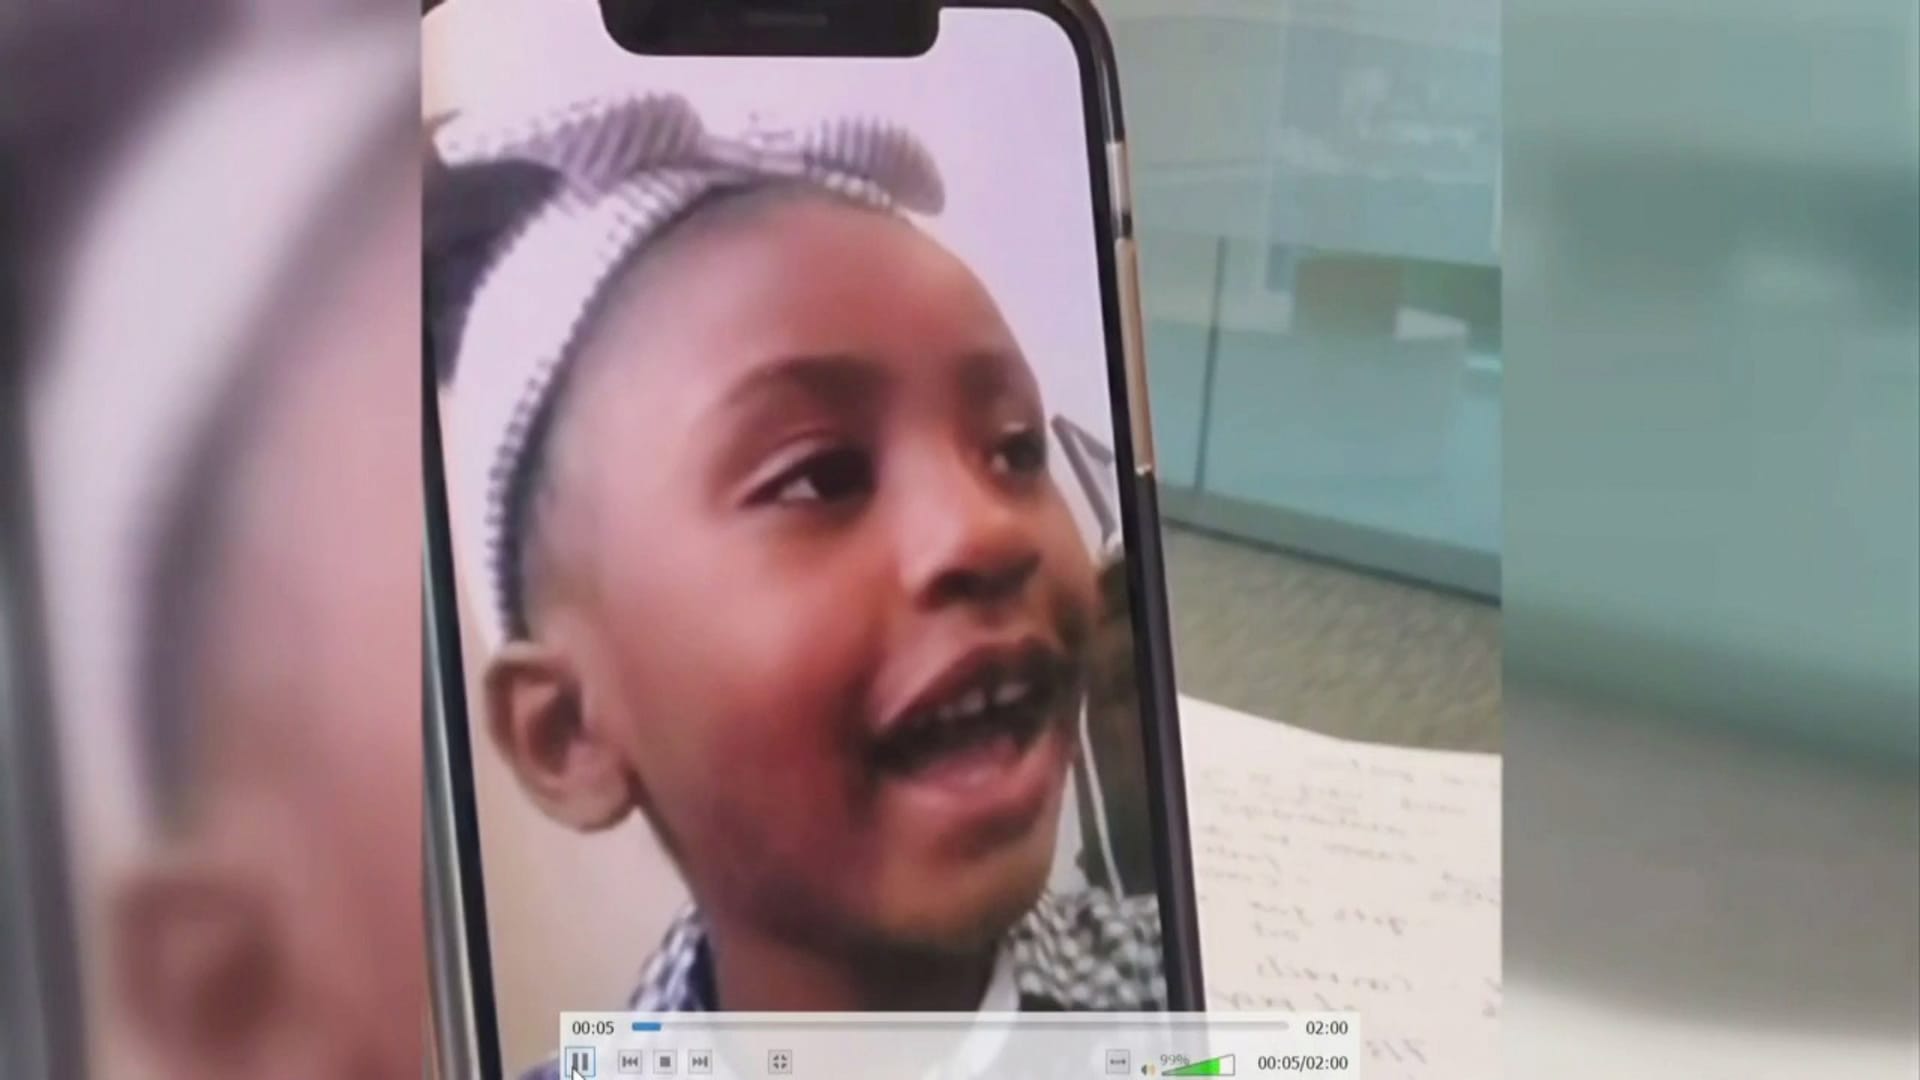 George Floyd's 7-year-old daughter Gianna testifies via a cell phone video before the sentencing of former Minneapolis police officer Derek Chauvin for the murder of her father George Floyd during a sentencing hearing in Minneapolis, Minnesota, U.S. June 25, 2021 in a still image from video.